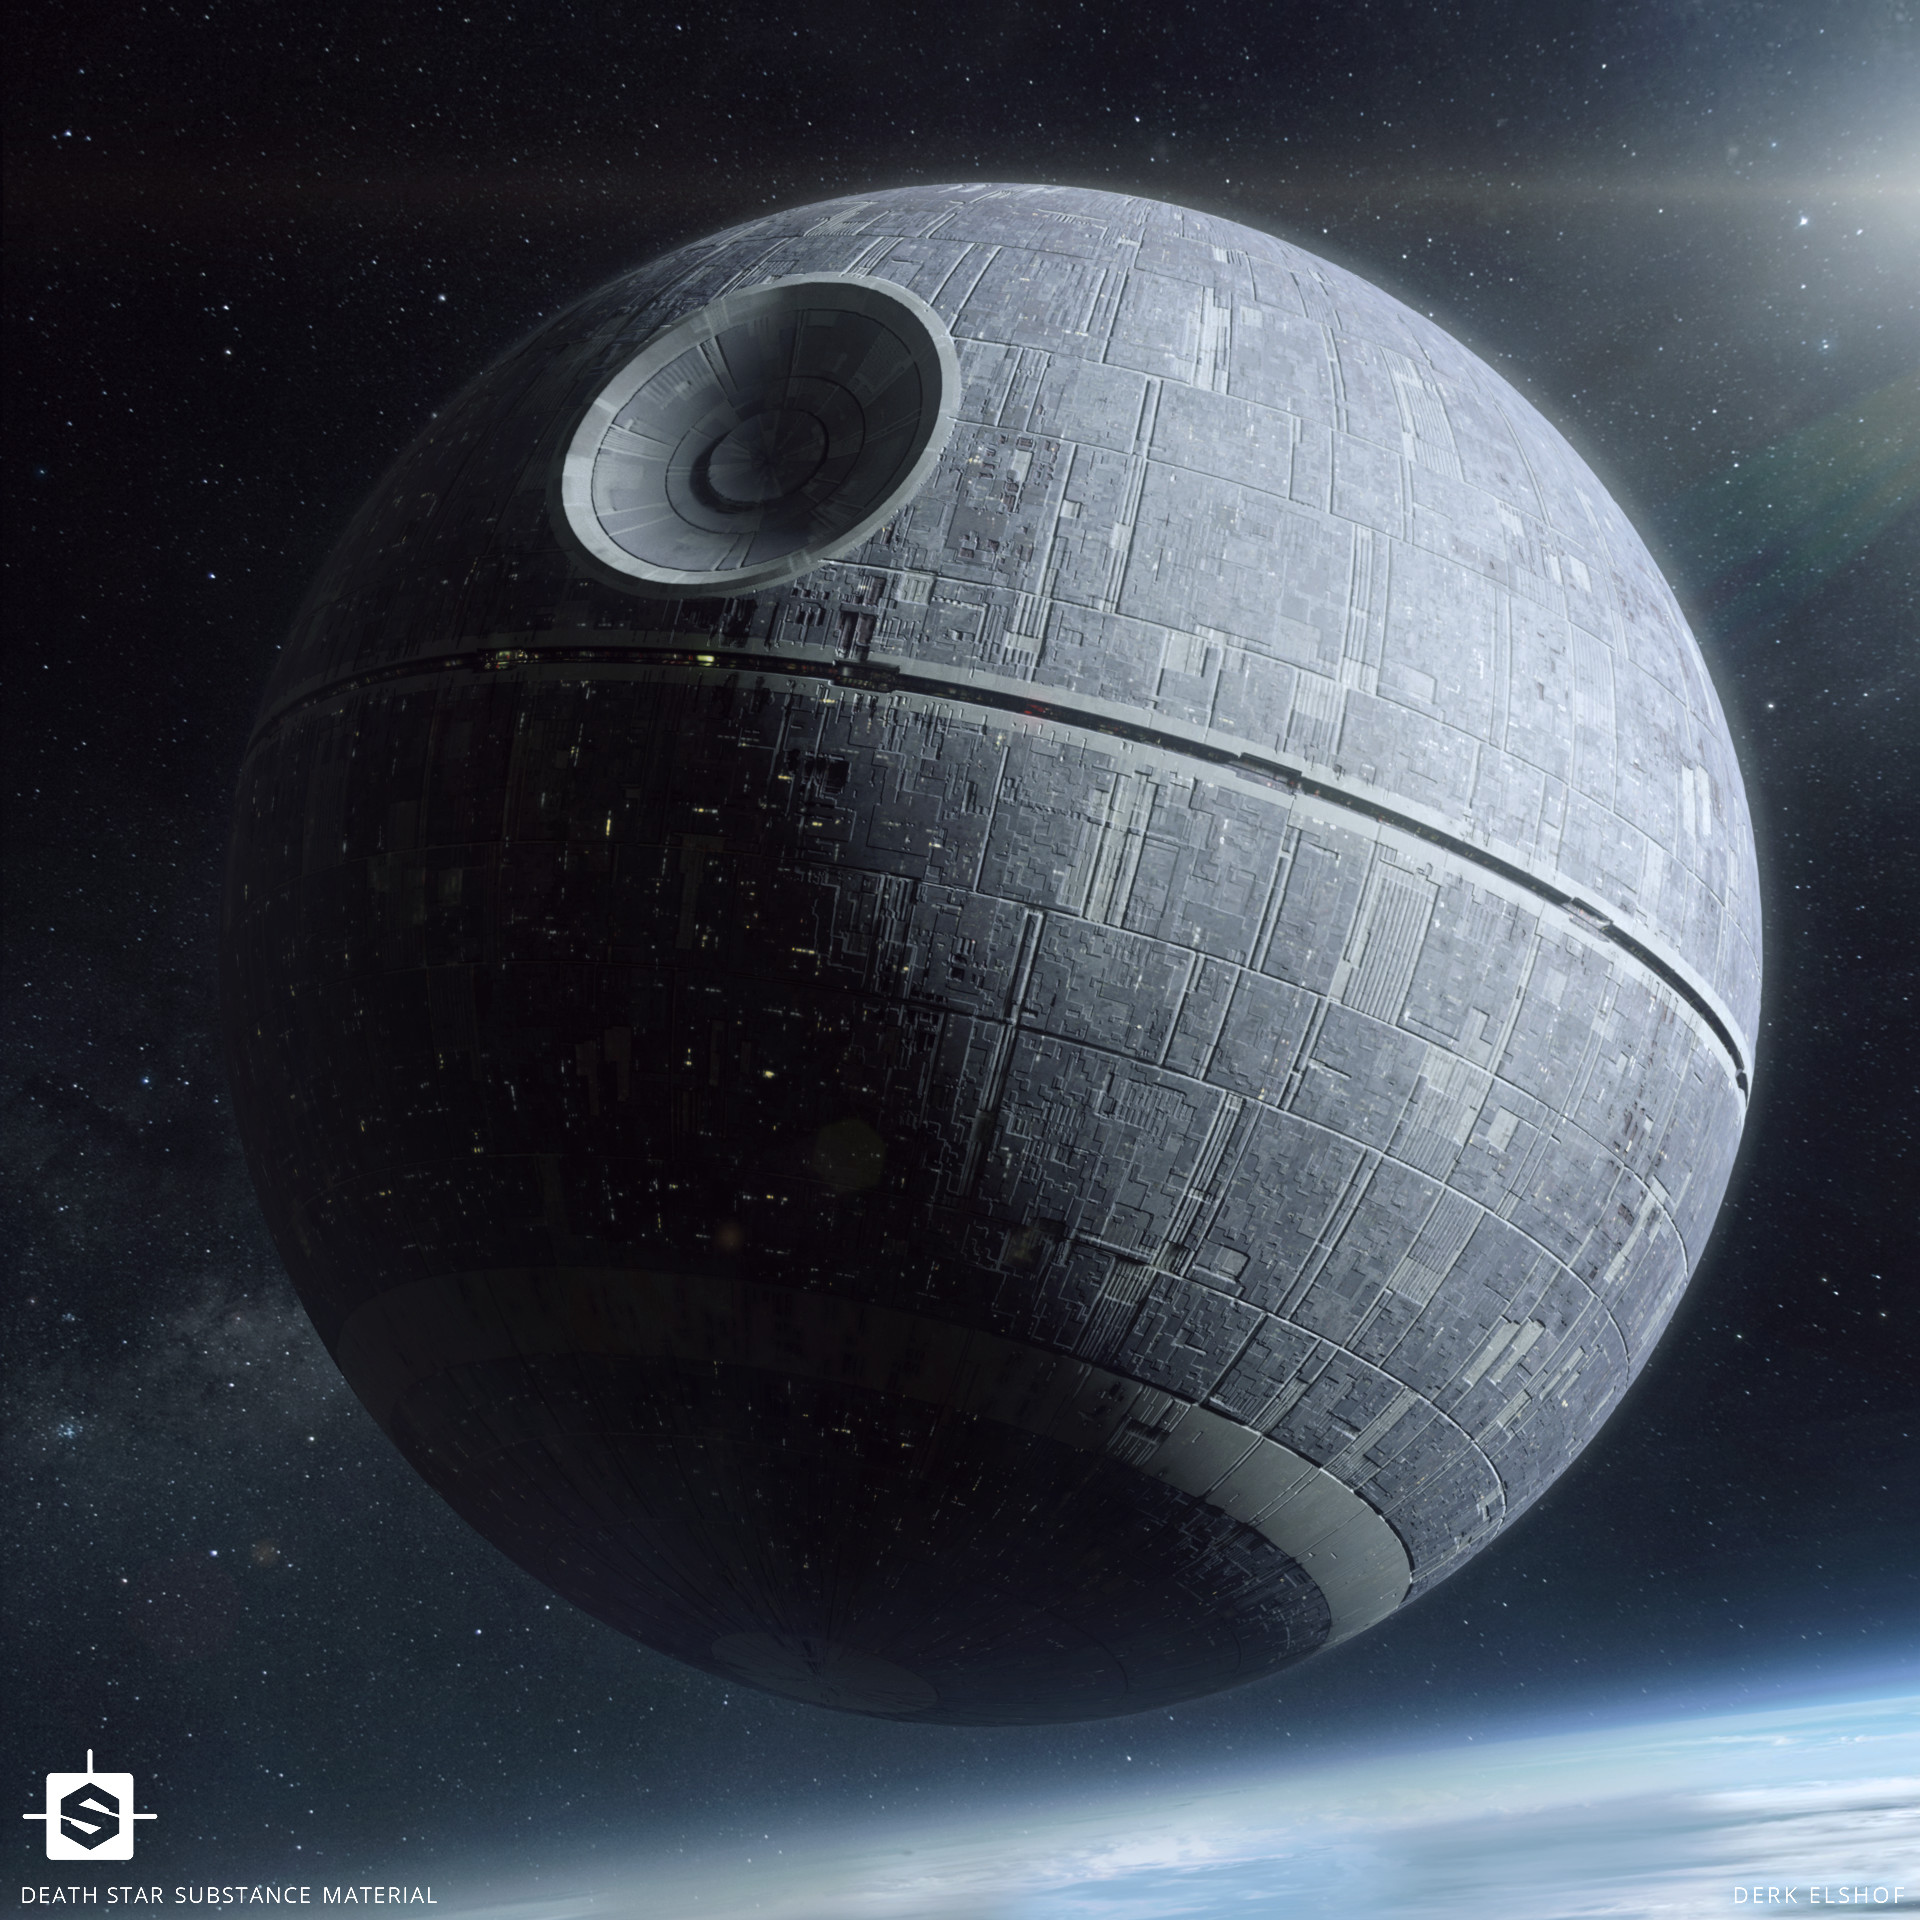 The Death Star image